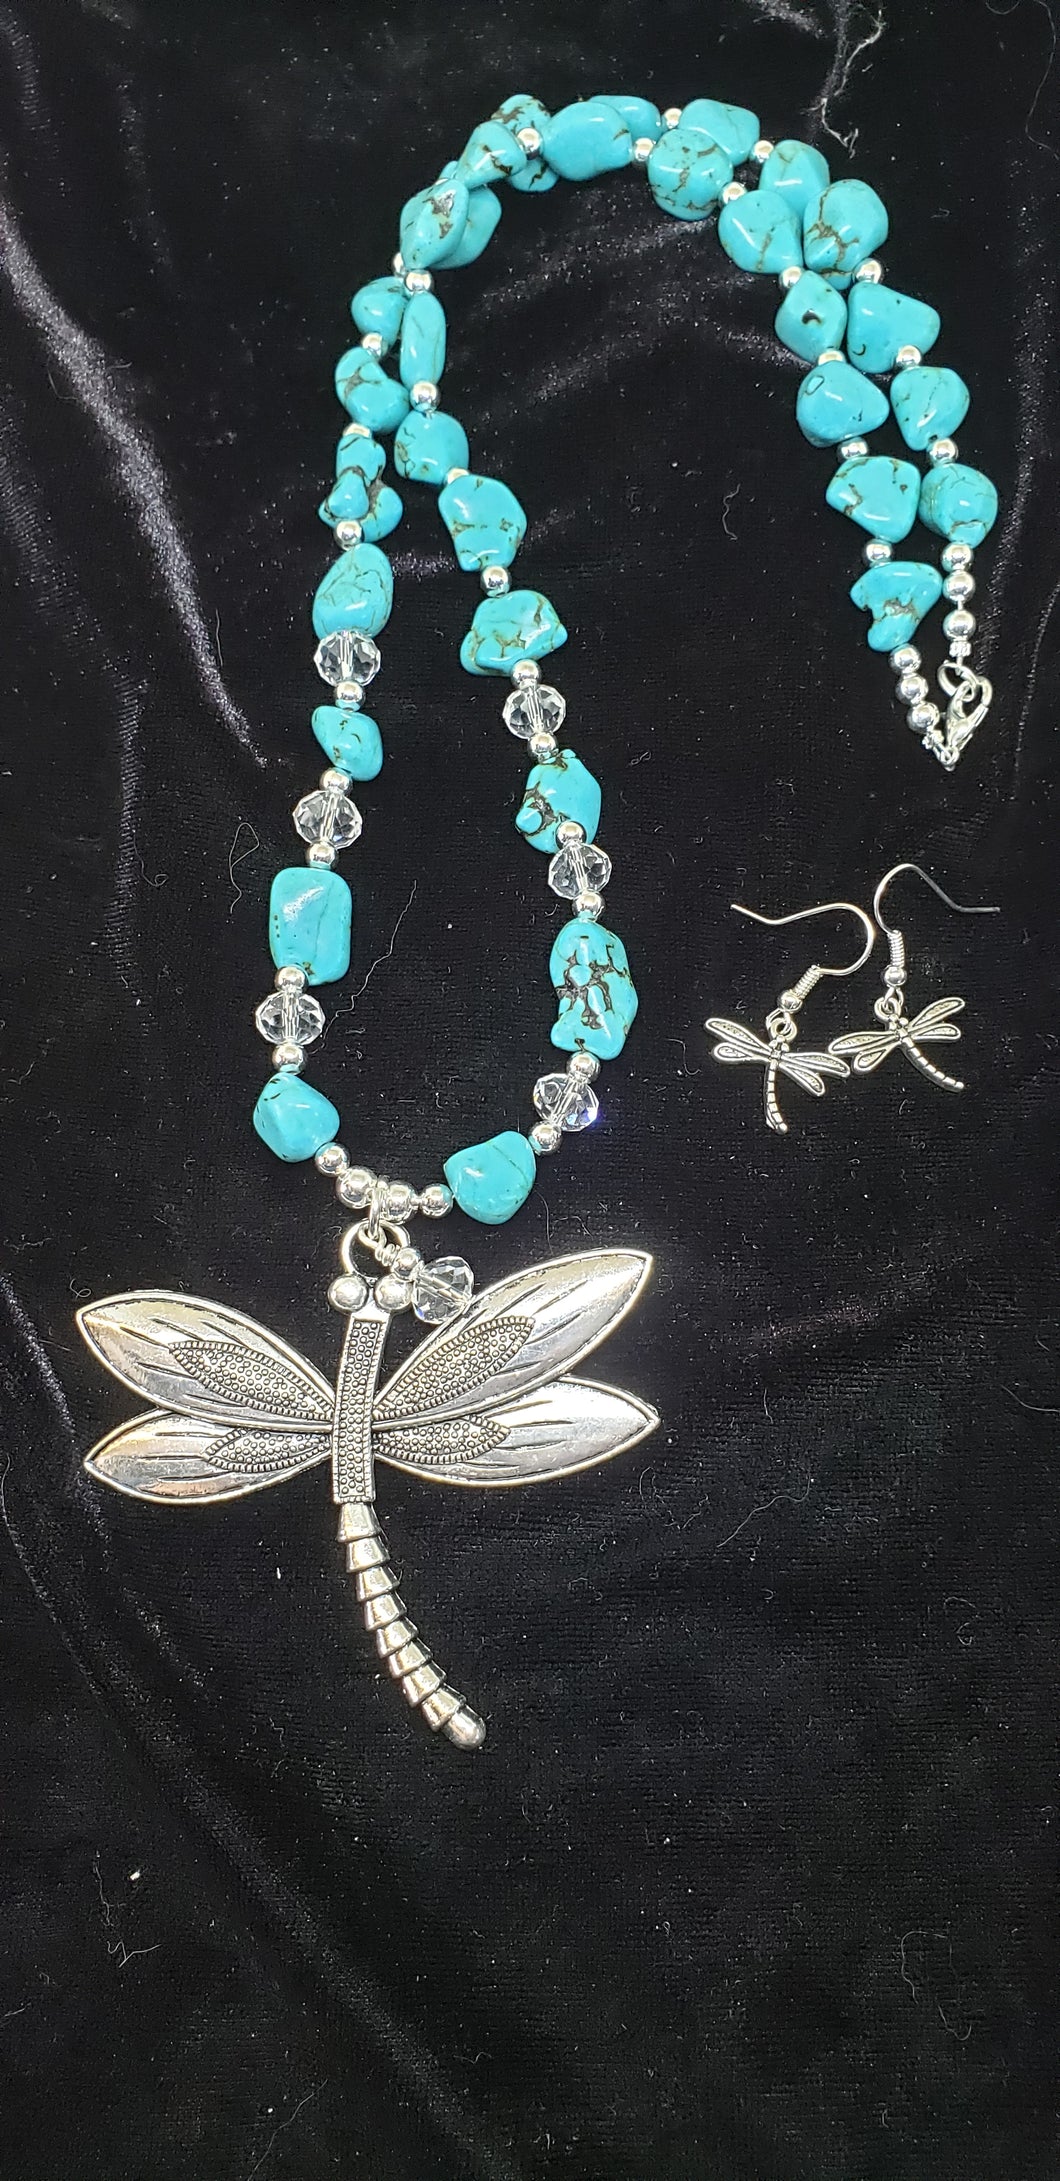 Dragonfly Necklace and earrings